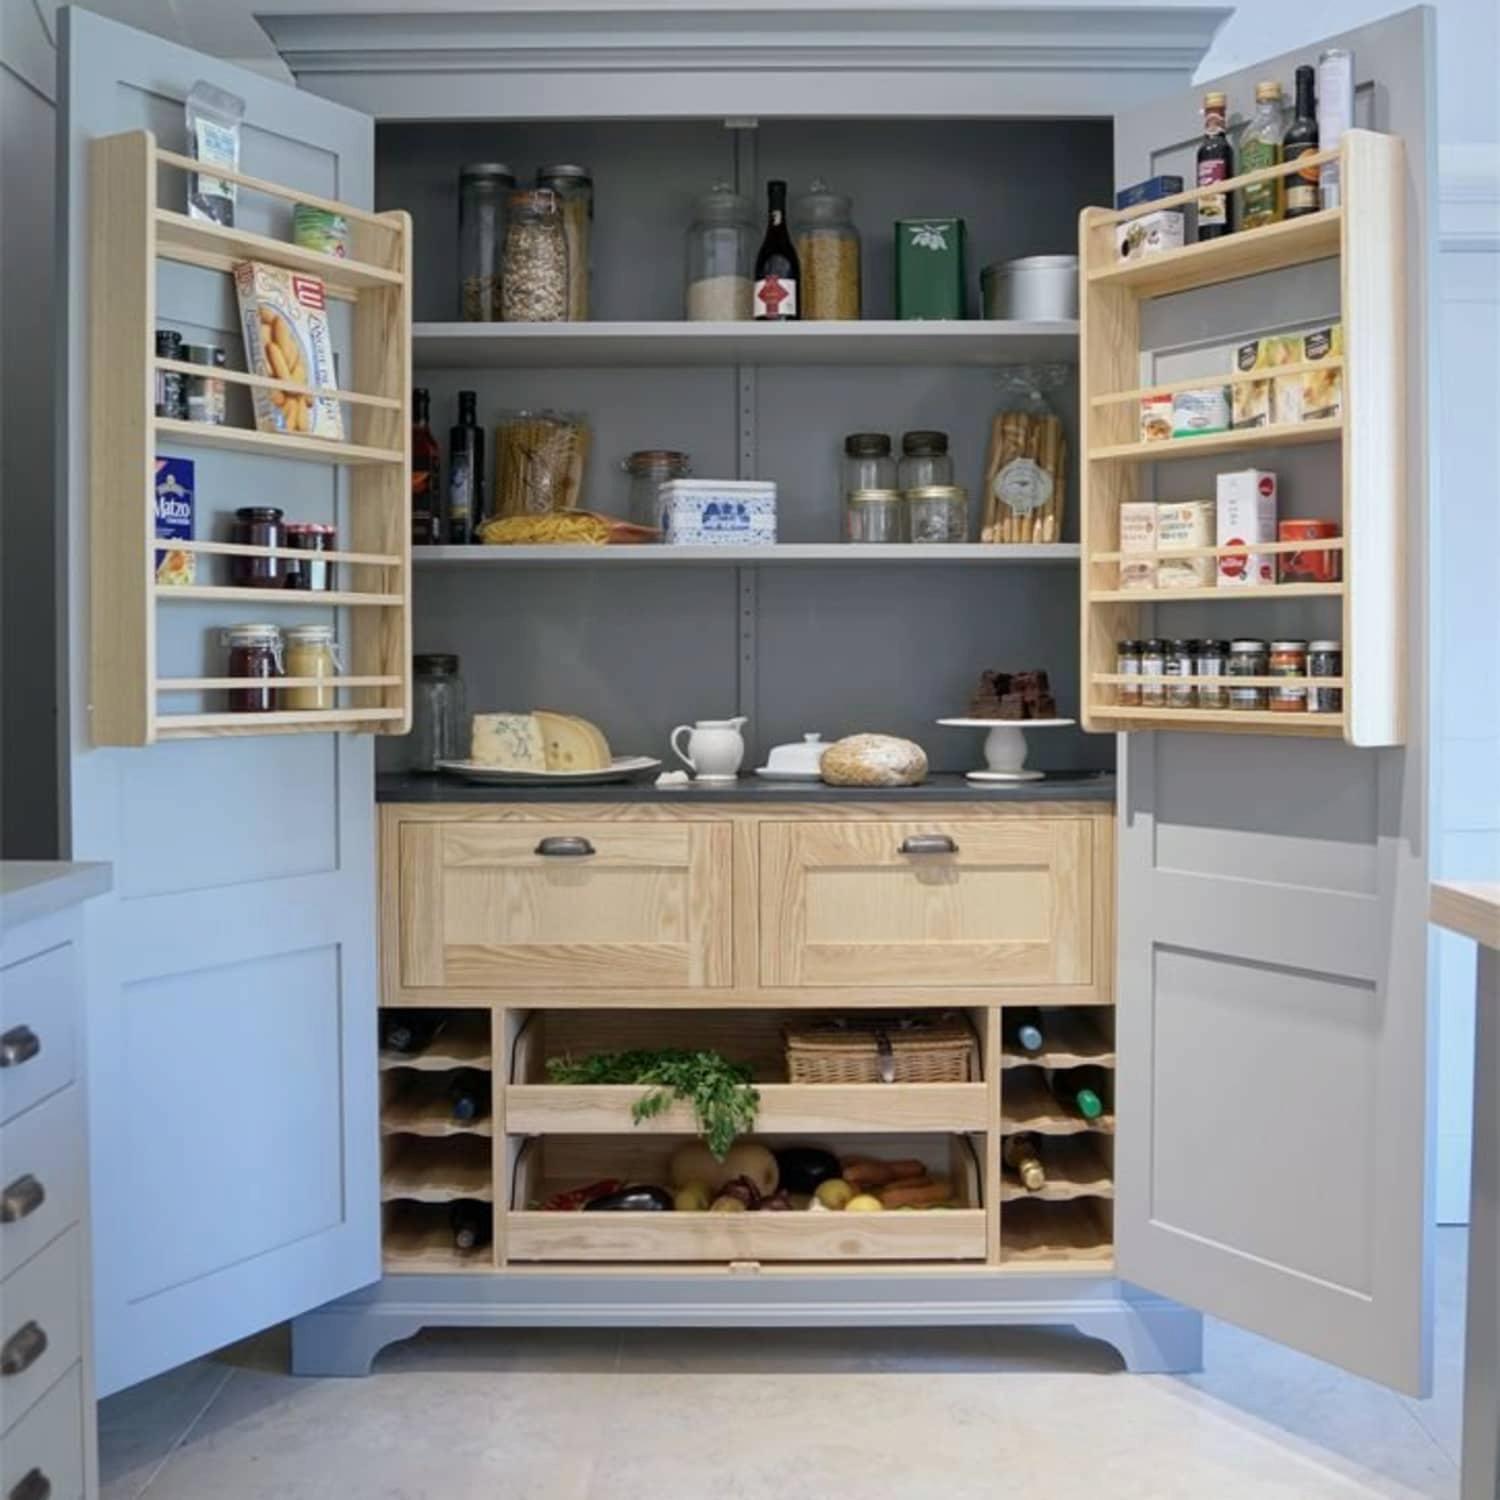 Why larder units are handy for hiding all sorts of stuff!